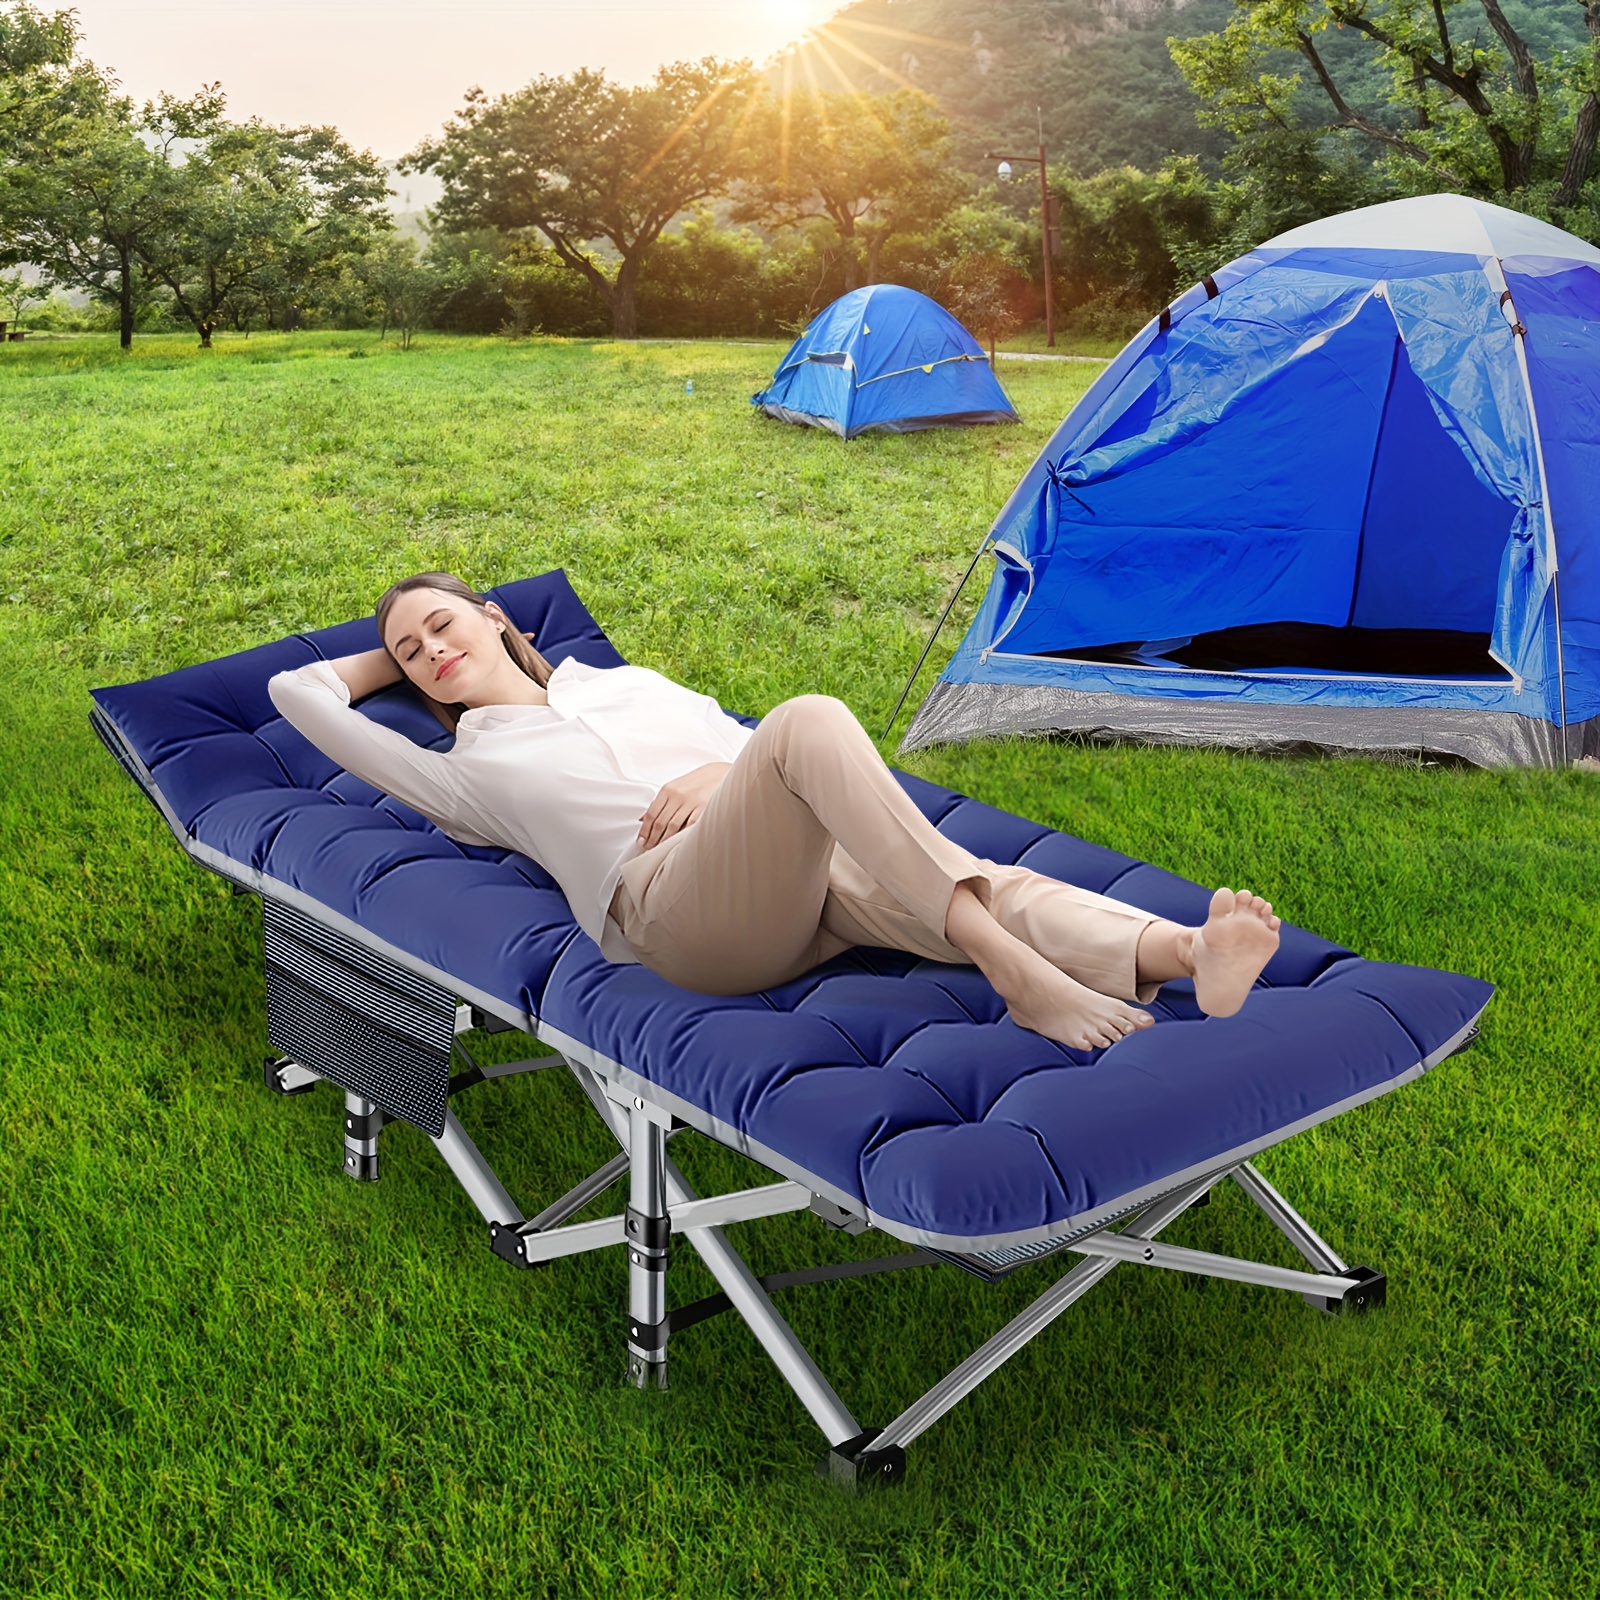 

Lilypelle Portable Folding Camping Cot Bed, Heavy Duty Sleeping Bed, Travel Camp Cots With Carry Bag, For Outdoor Beach